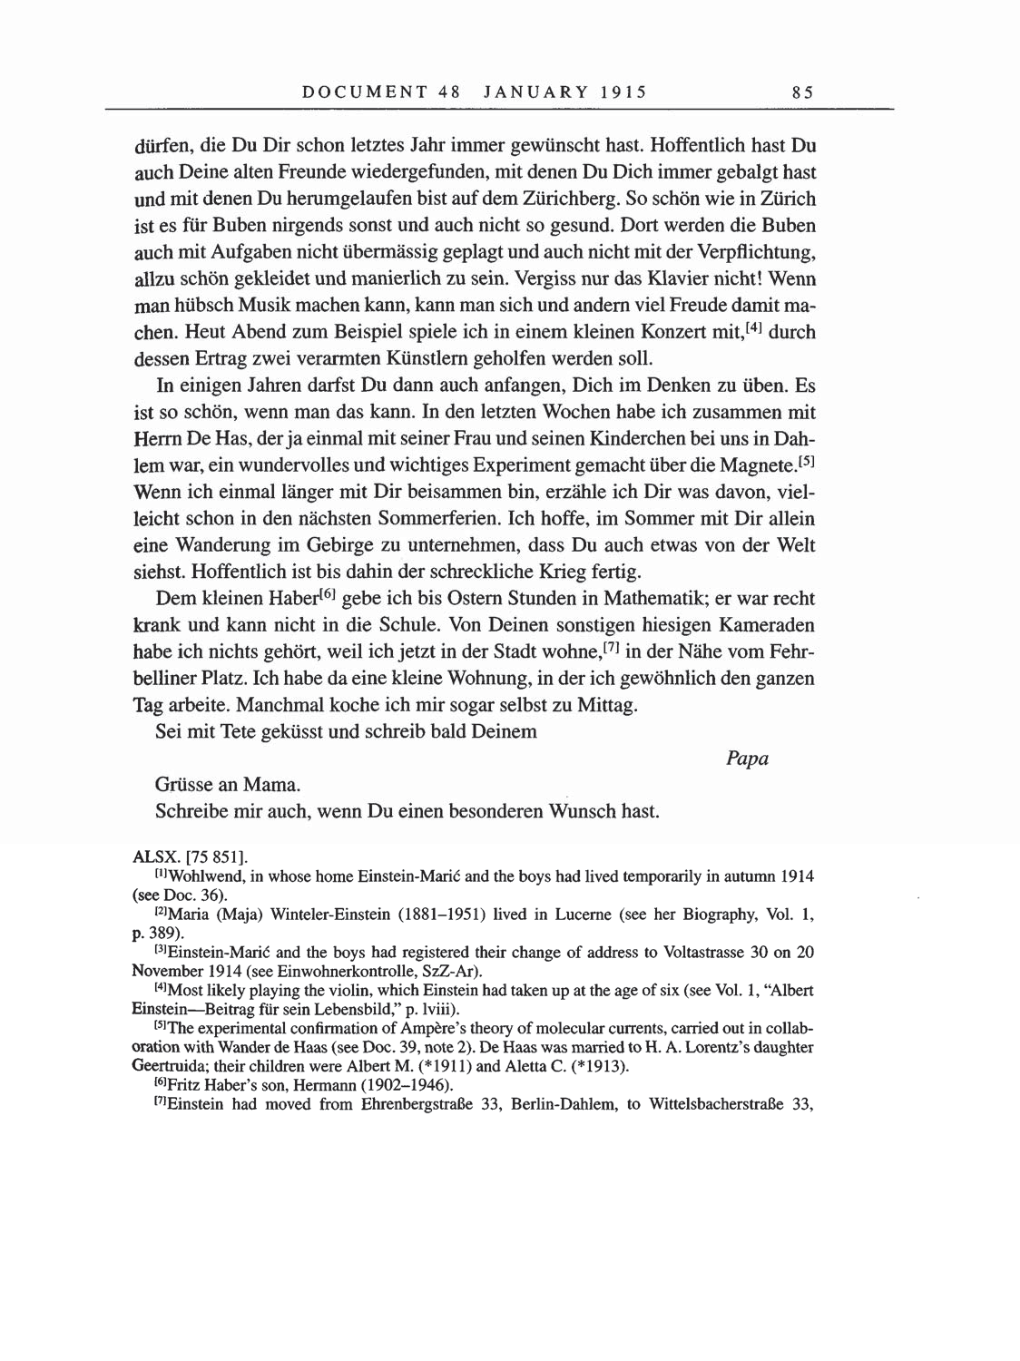 Volume 8, Part A: The Berlin Years: Correspondence 1914-1917 page 85